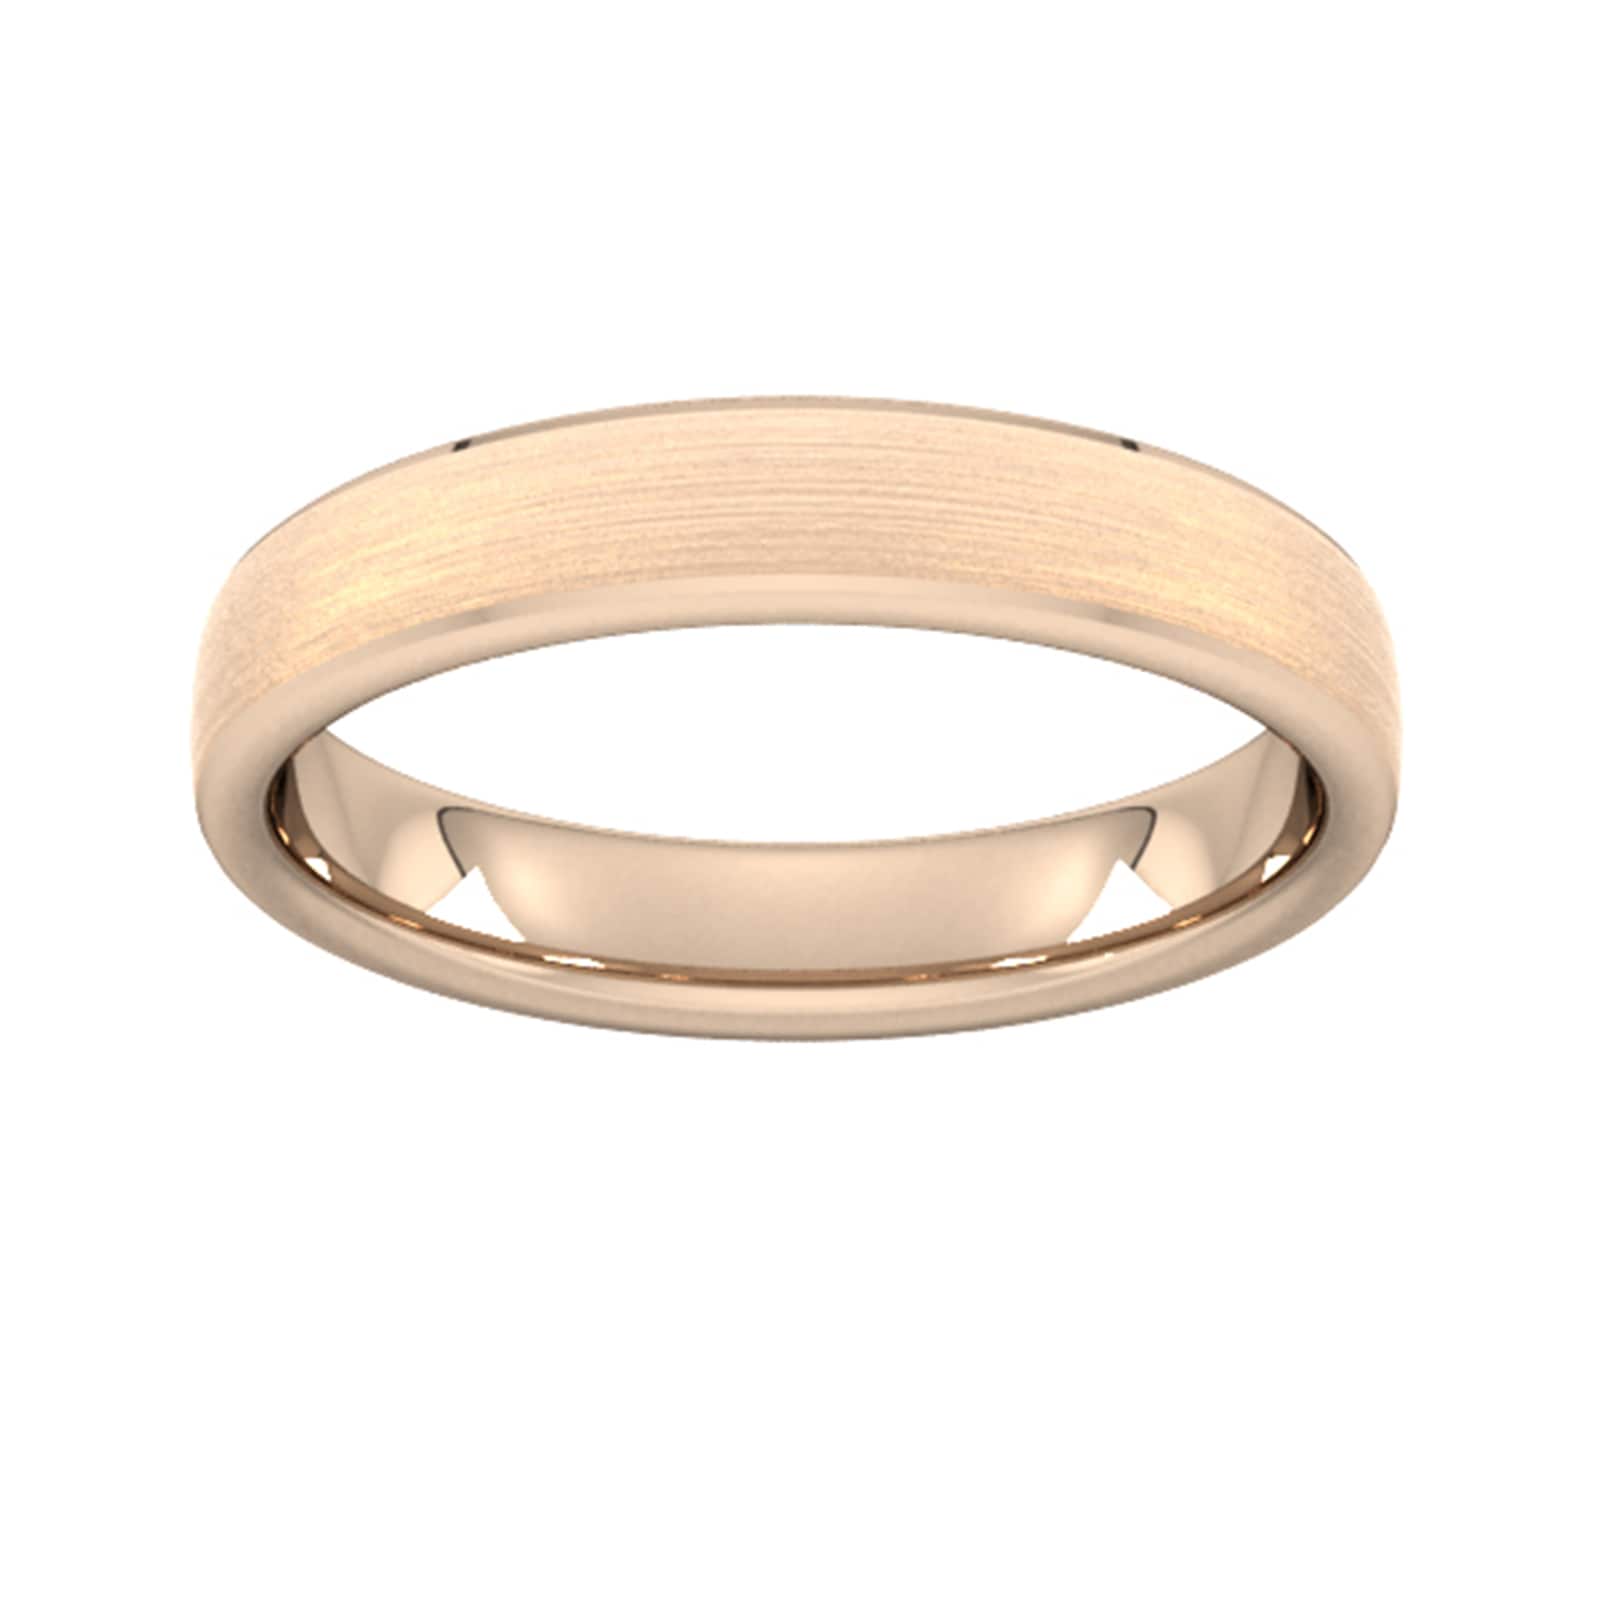 4mm D Shape Standard Polished Chamfered Edges With Matt Centre Wedding Ring In 18 Carat Rose Gold - Ring Size L